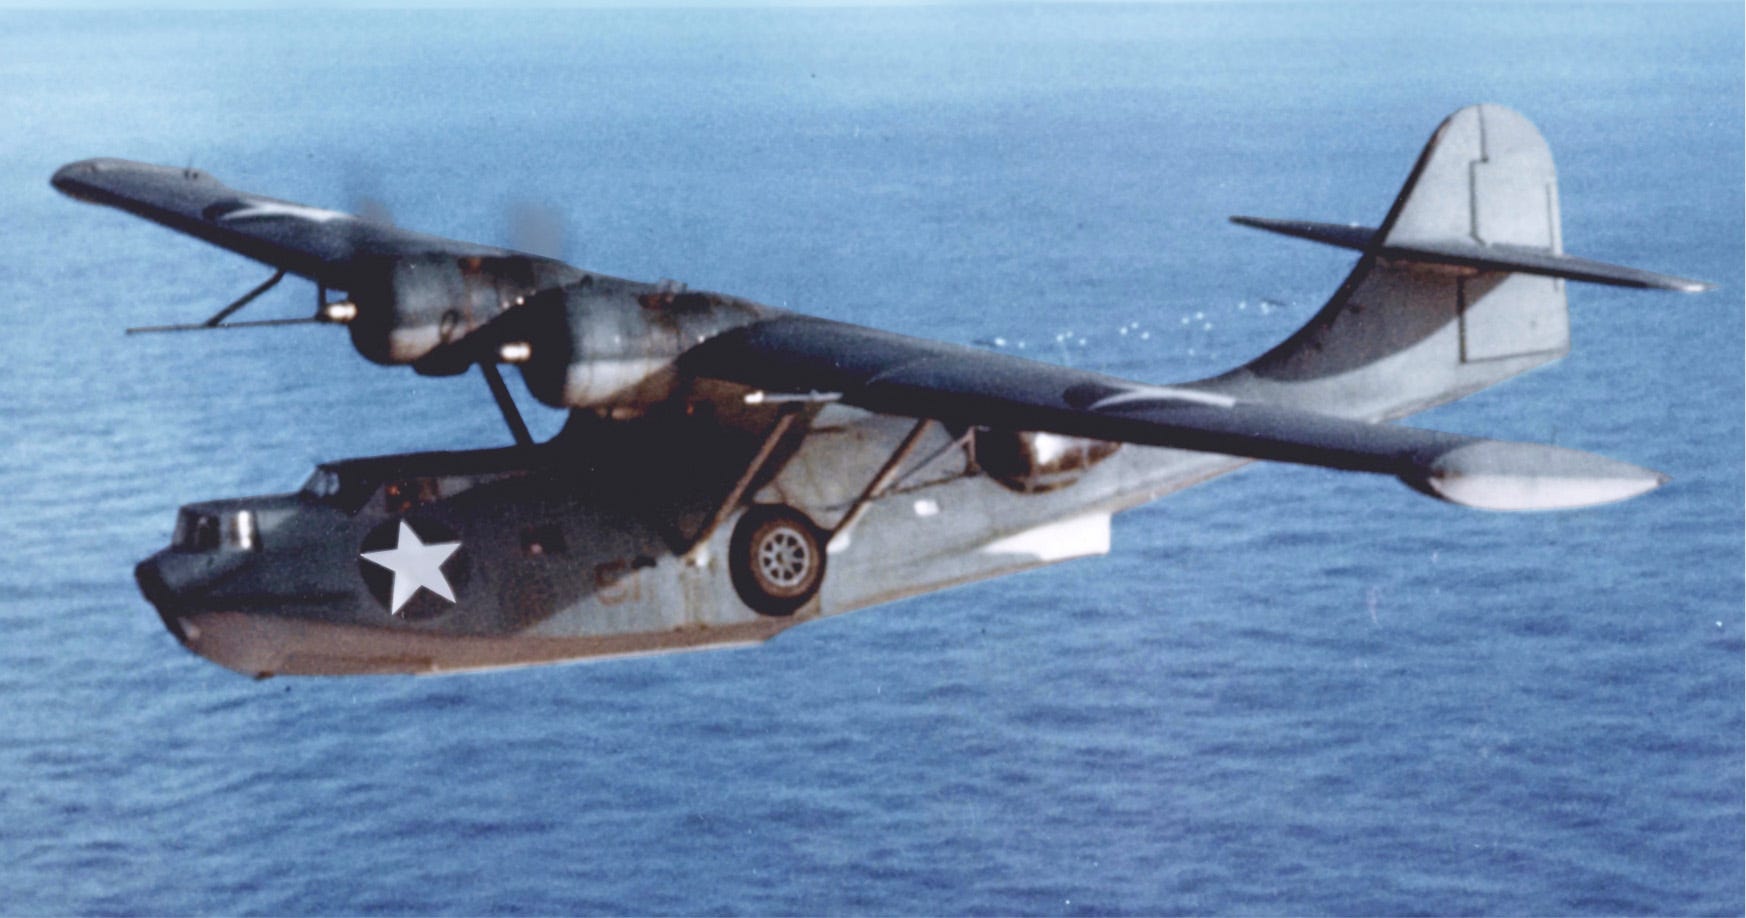 Consolidated PBY-5A Catalina flying boat